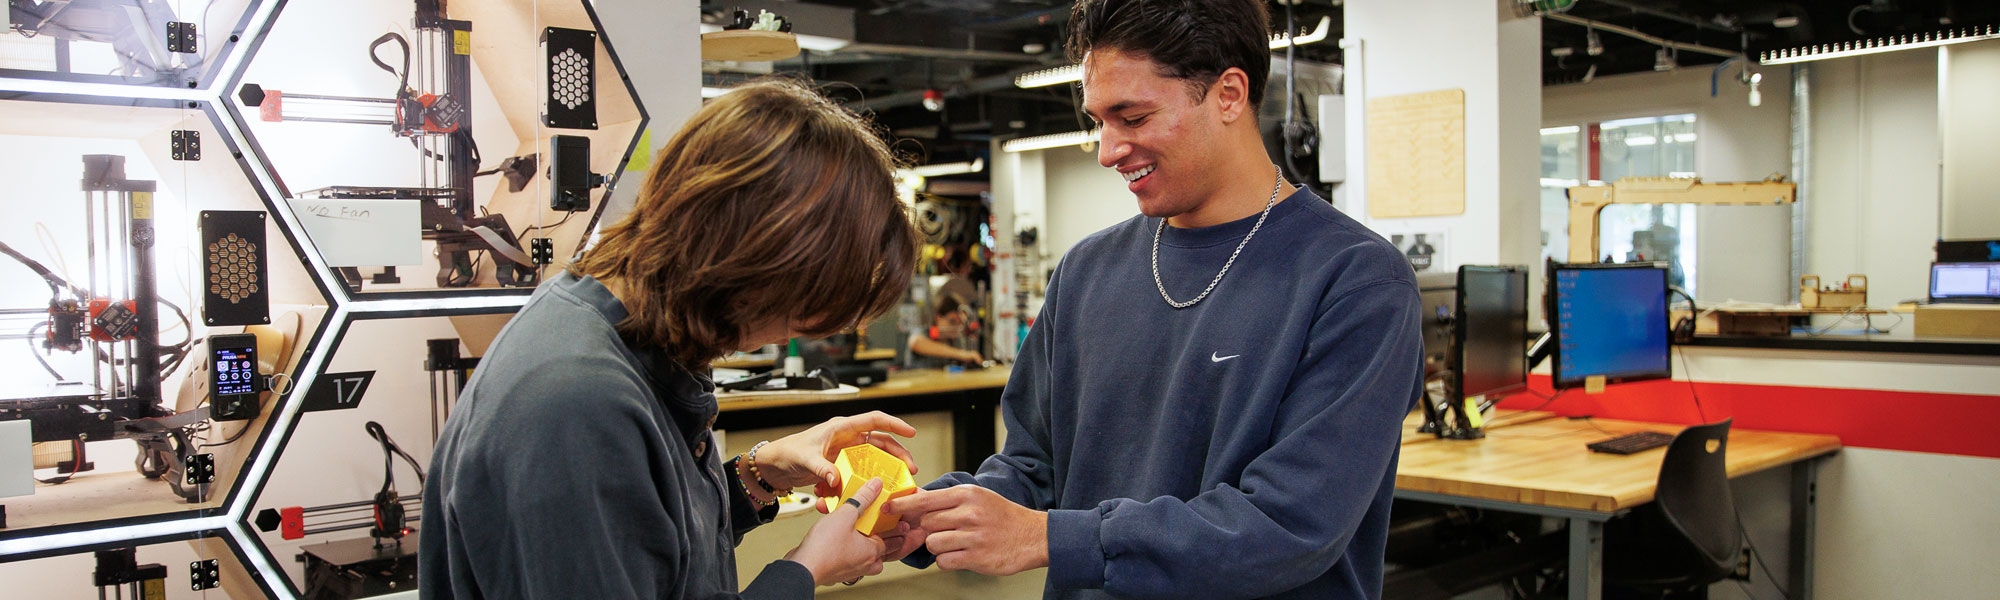 Two students work together on a 3D porotype in the fabrication lab.